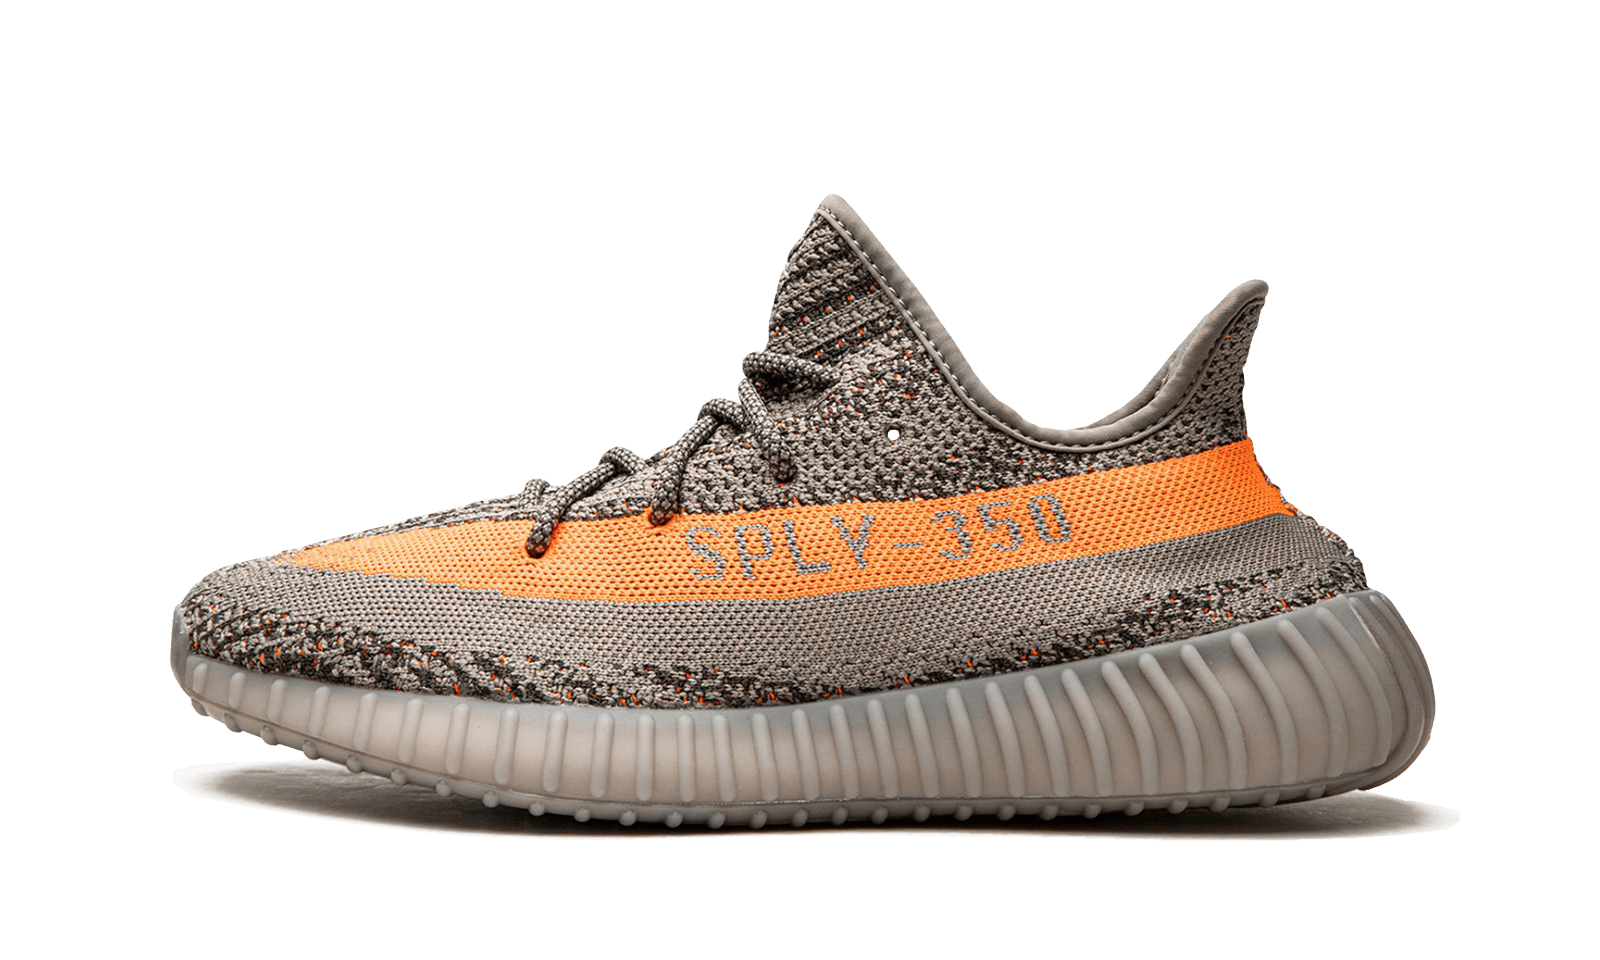 buy real Adidas Yeezy 350 V2 Beluga Reflective for 225 USD only